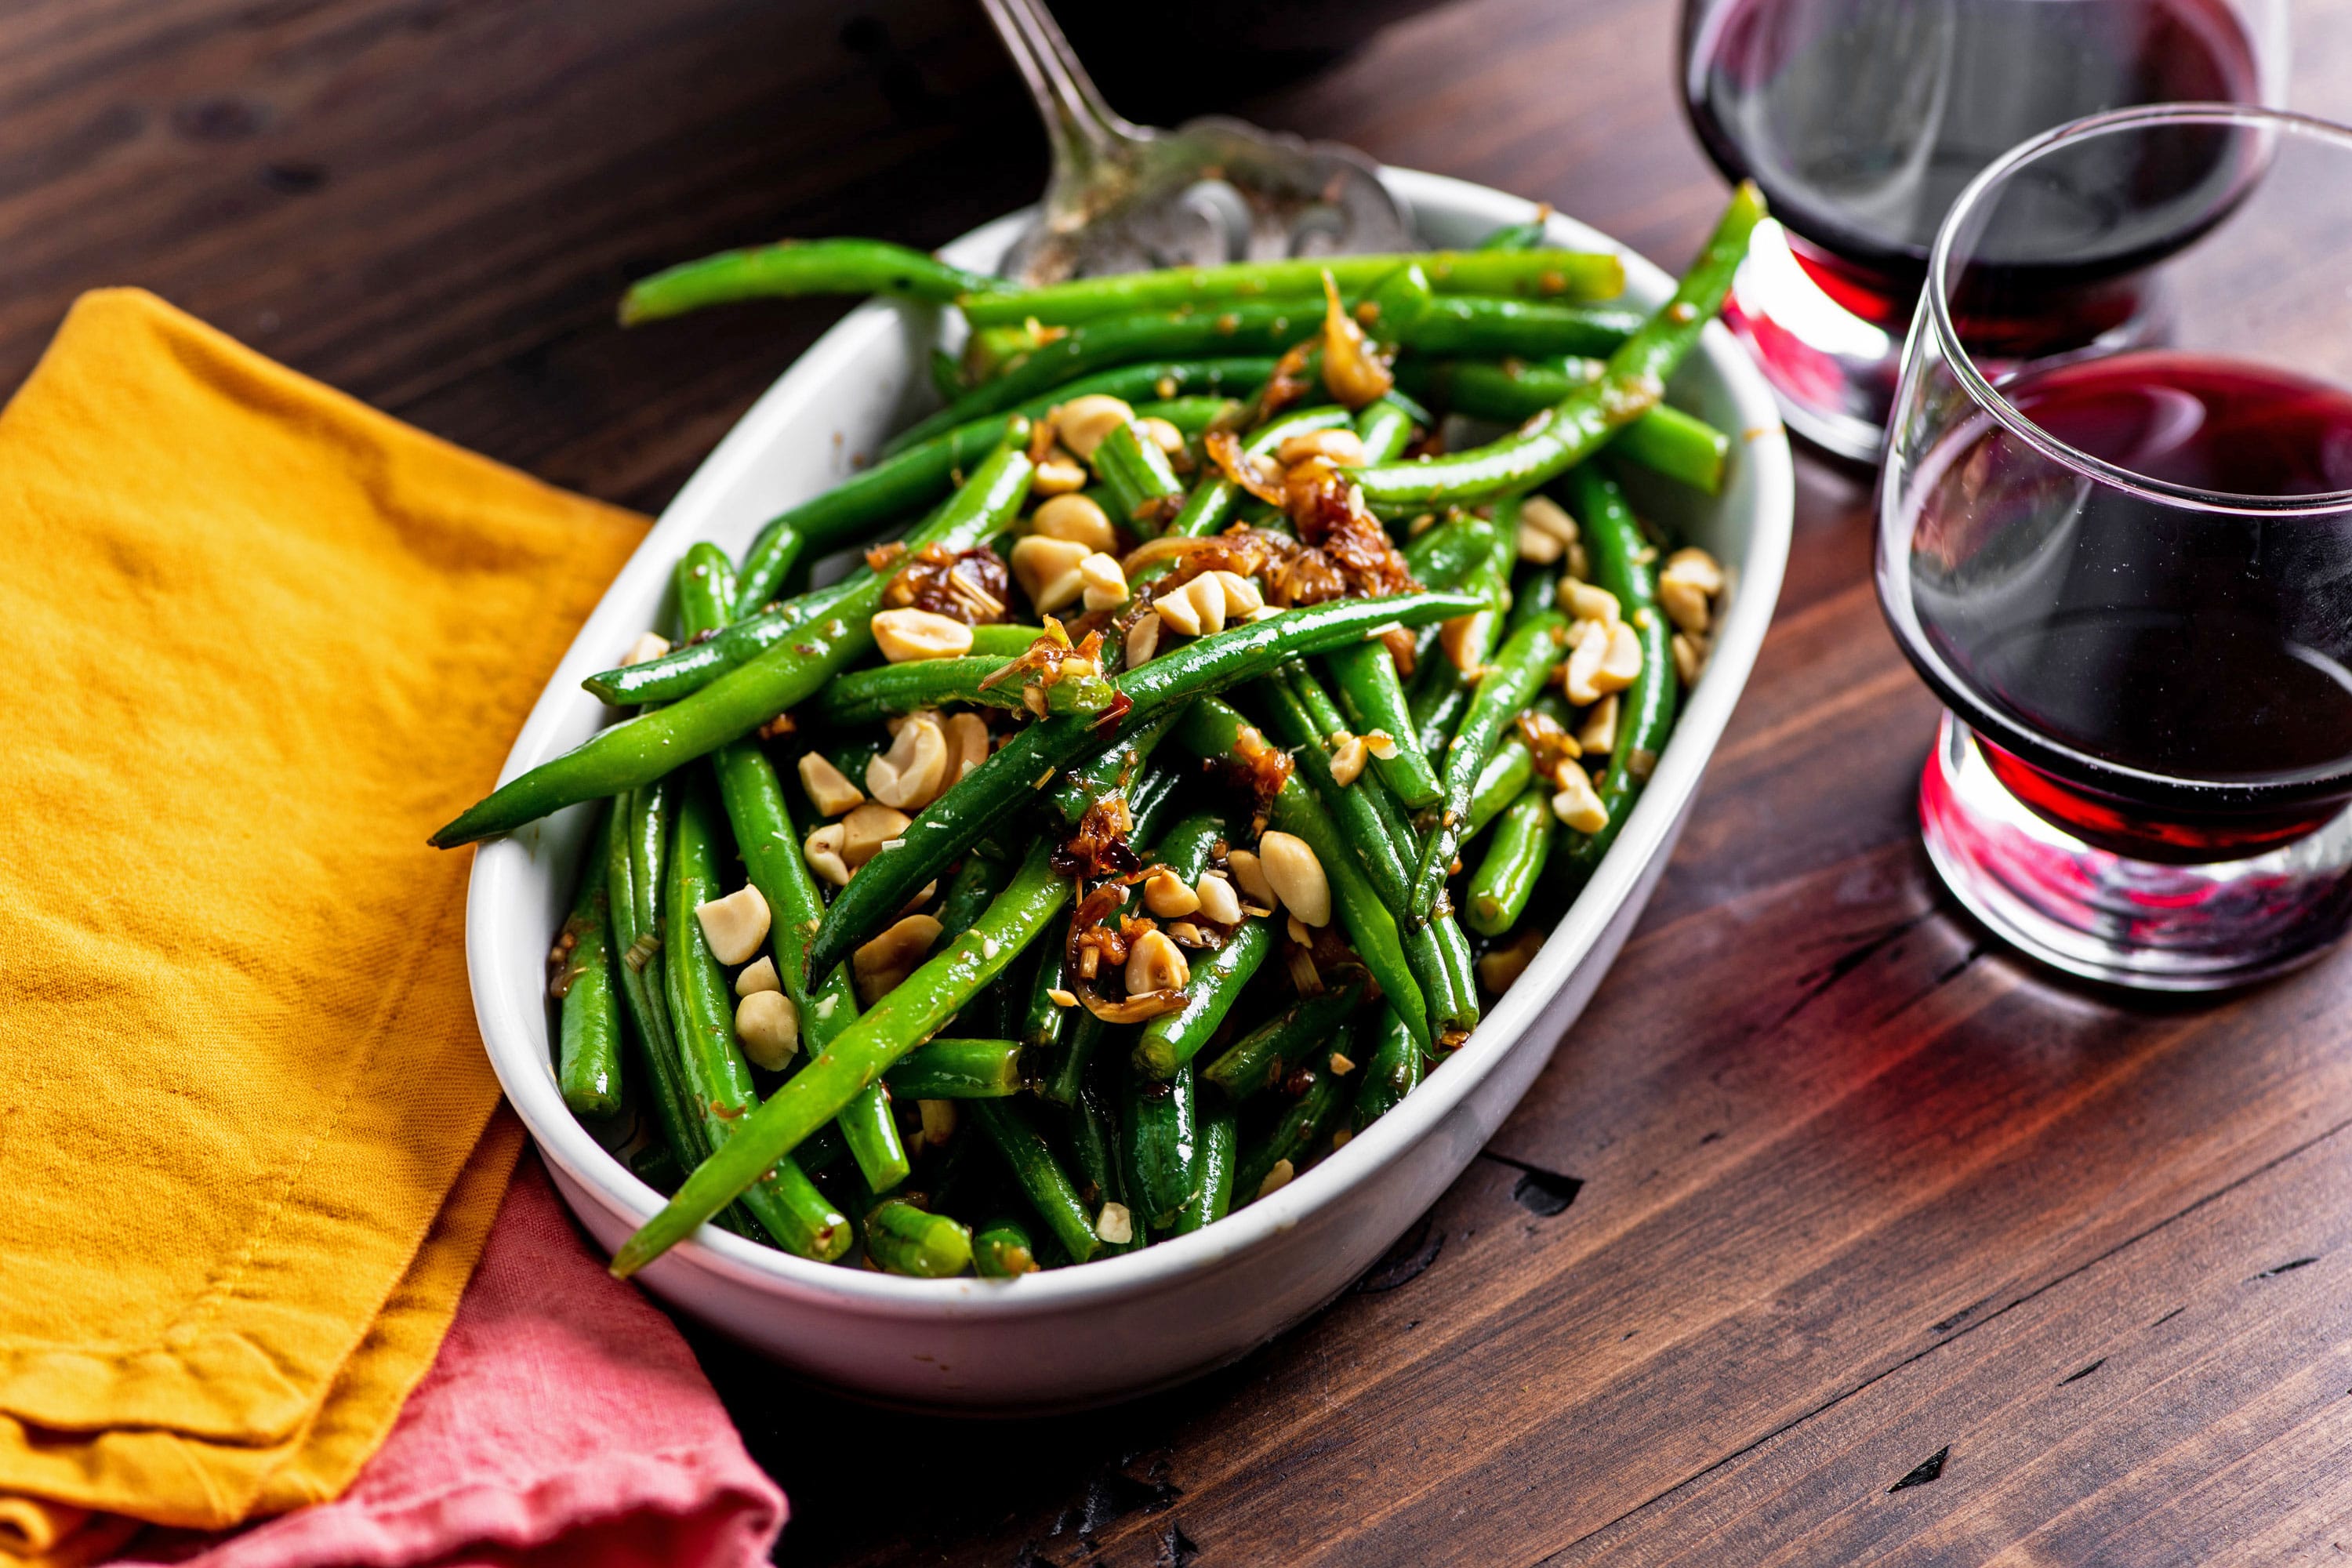 Oblong dish of Thai Green Beans topped with peanuts.